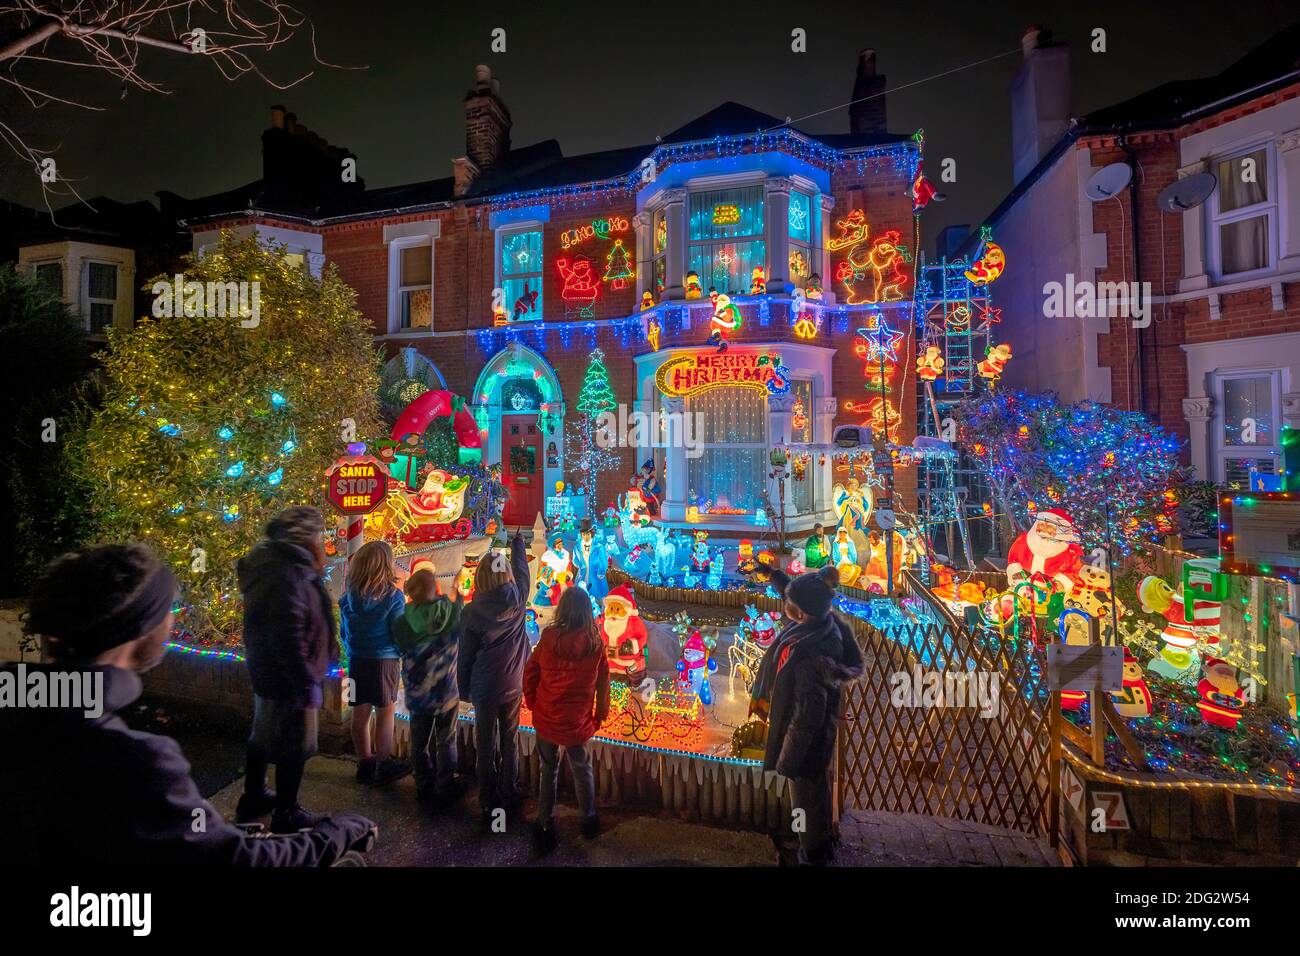 London, UK. 7th Dec 2020. Spectacular Christmas house lights display in Lewisham. For the past 15 Christmases, Garry Leach and his family spend around two months transforming the front garden in Birkhall Road, Catford, into a winter wonderland in aid of St Christopher’s Hospice and other local charities. Credit: Guy Corbishley/Alamy Live News Stock Photo